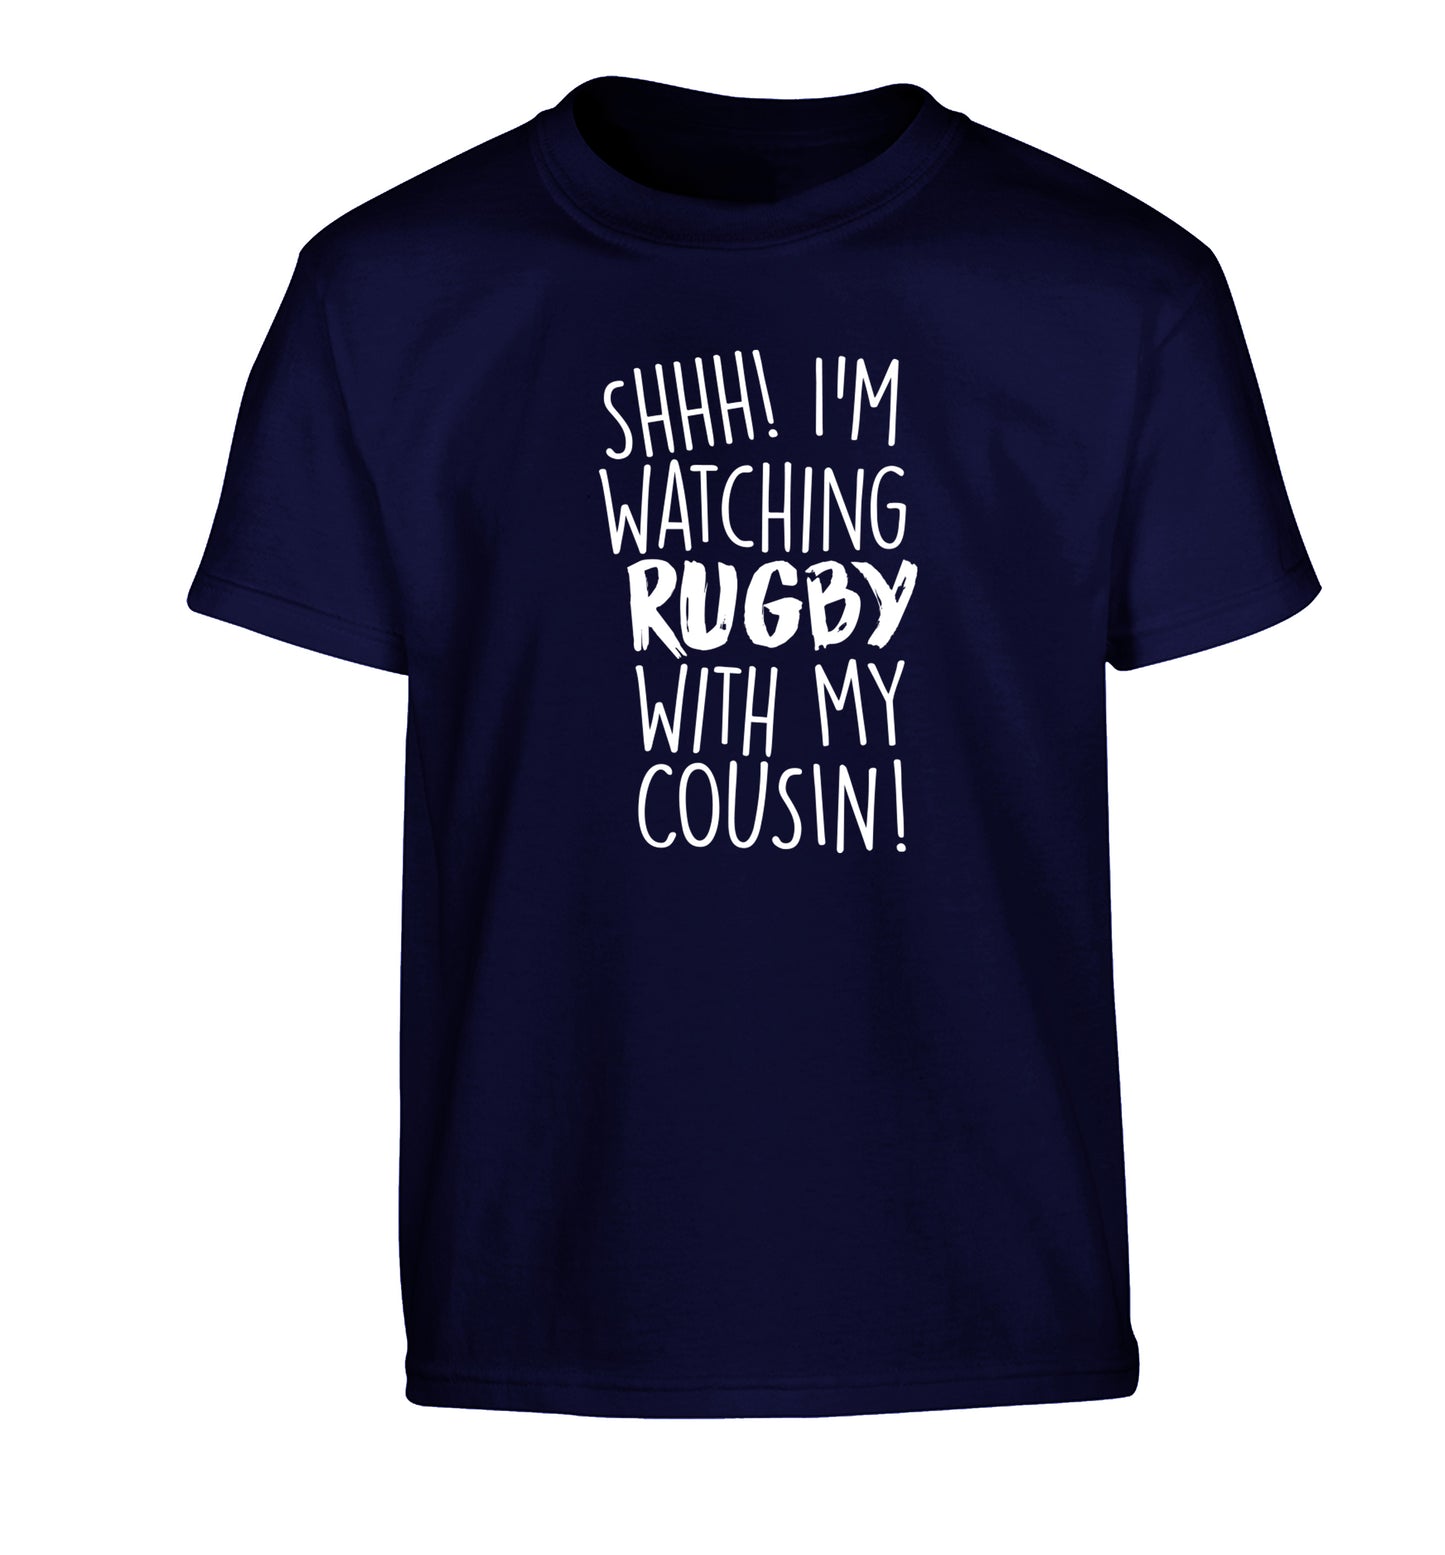 Shhh I'm watching rugby with my cousin Children's navy Tshirt 12-13 Years